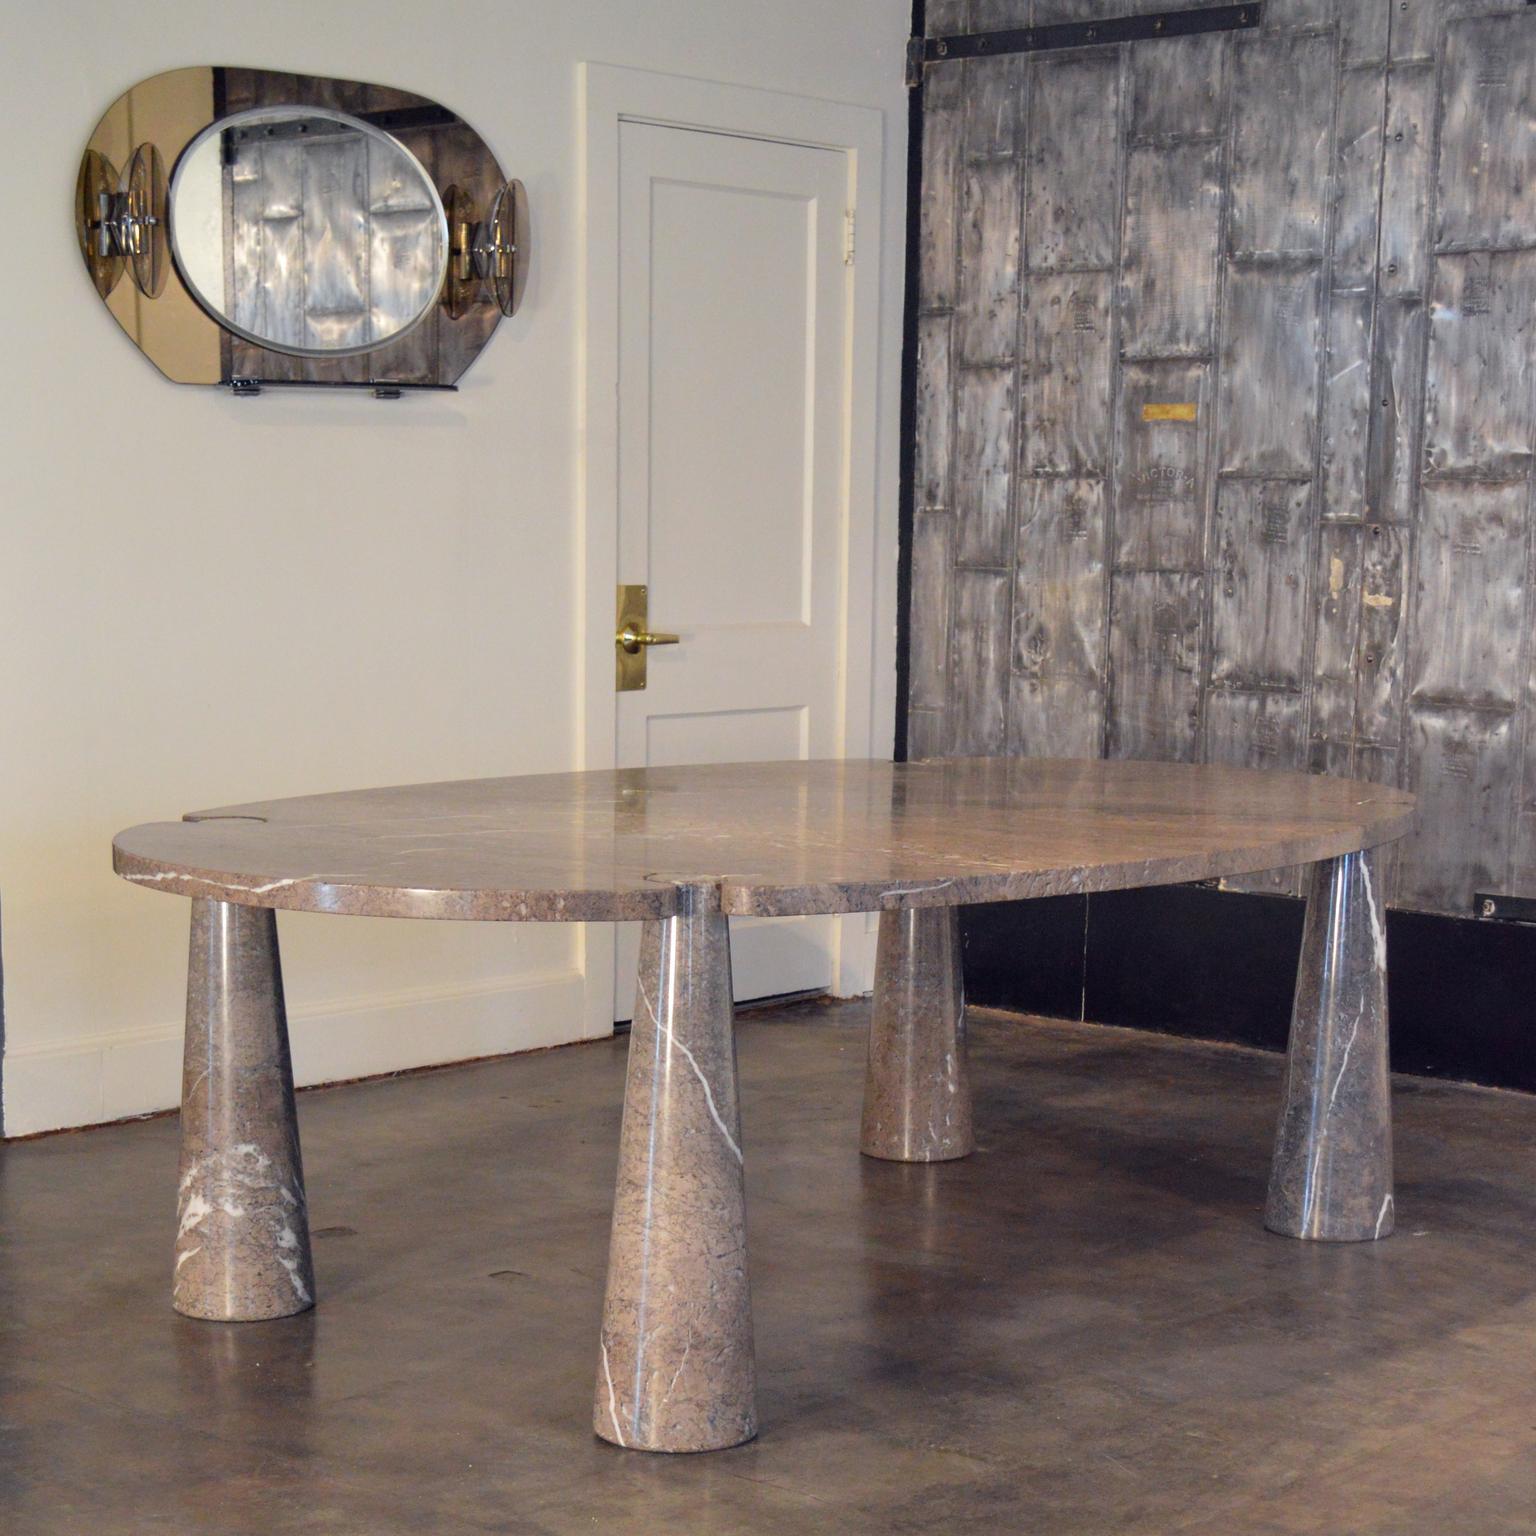 Large 'Eros' Dining Table designed by Italian architect Angelo Mangiarotti. This scarce example made by Skipper, circa 1971,  is constructed exclusively from Mondragone Marble. The stone exhibits a range of texture and depth of color-- from mocha